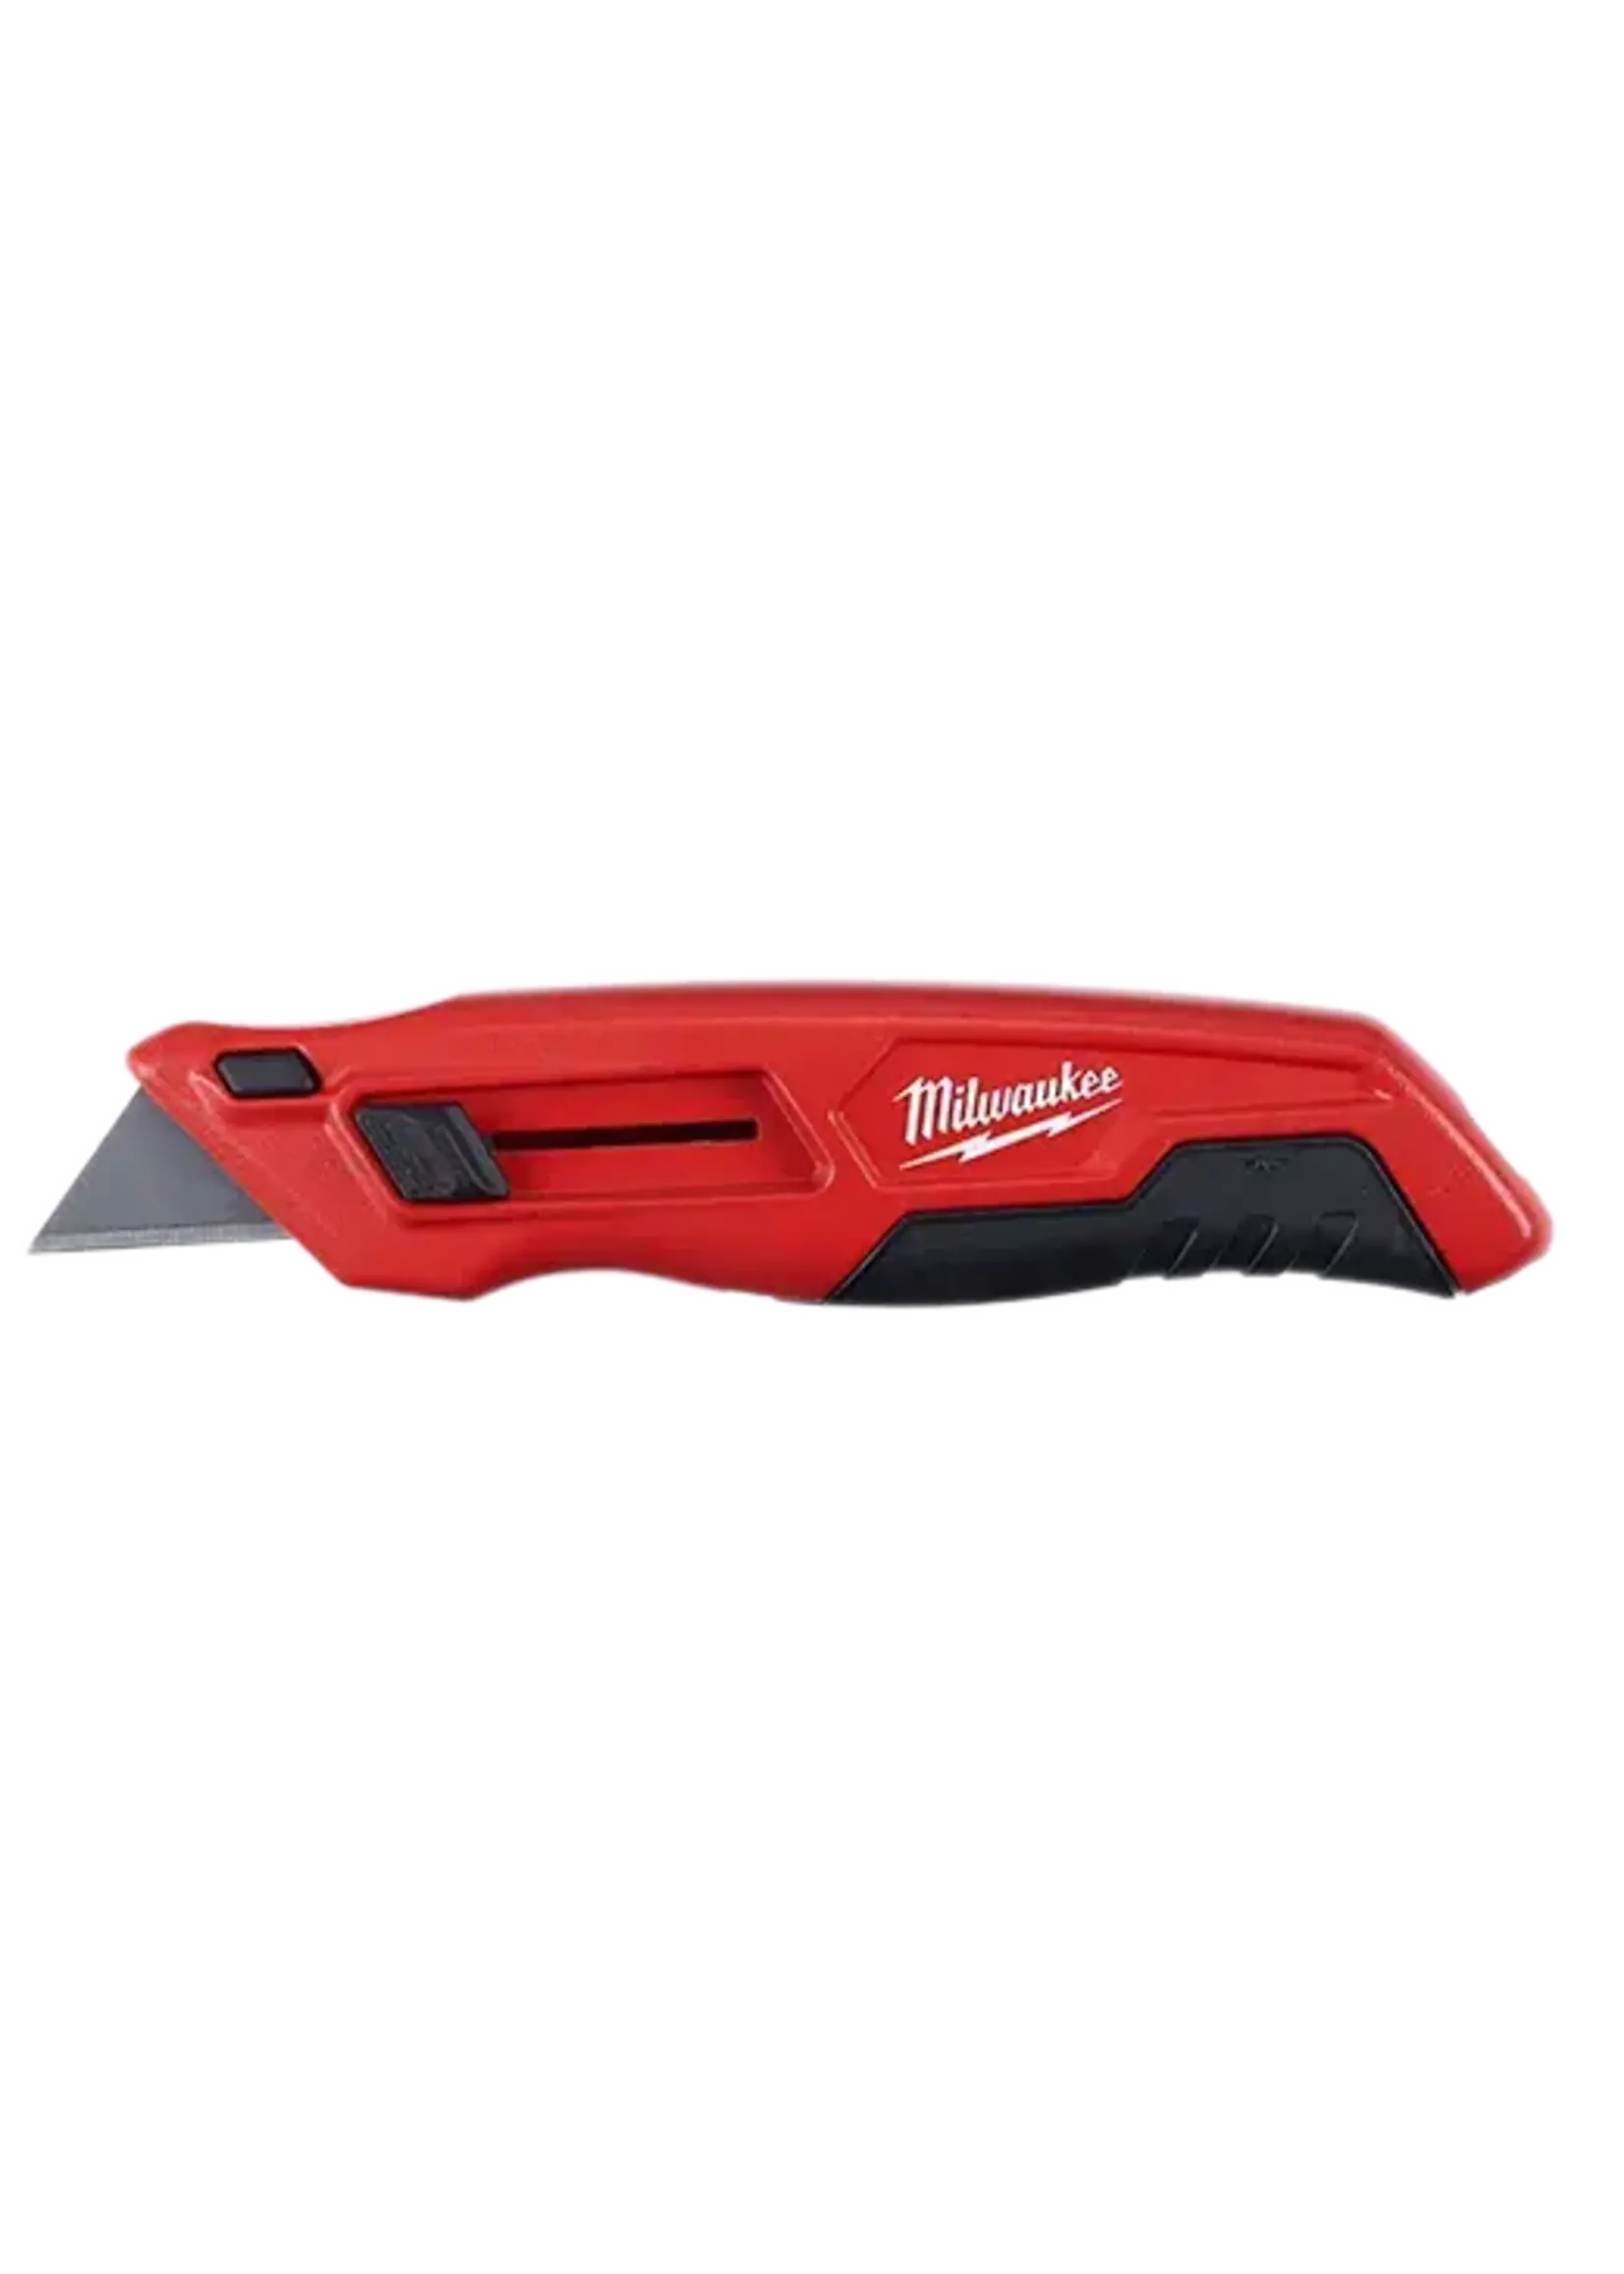 MILWAUKEE Slide-Out Utility Knife with General Purpose Blade Storage